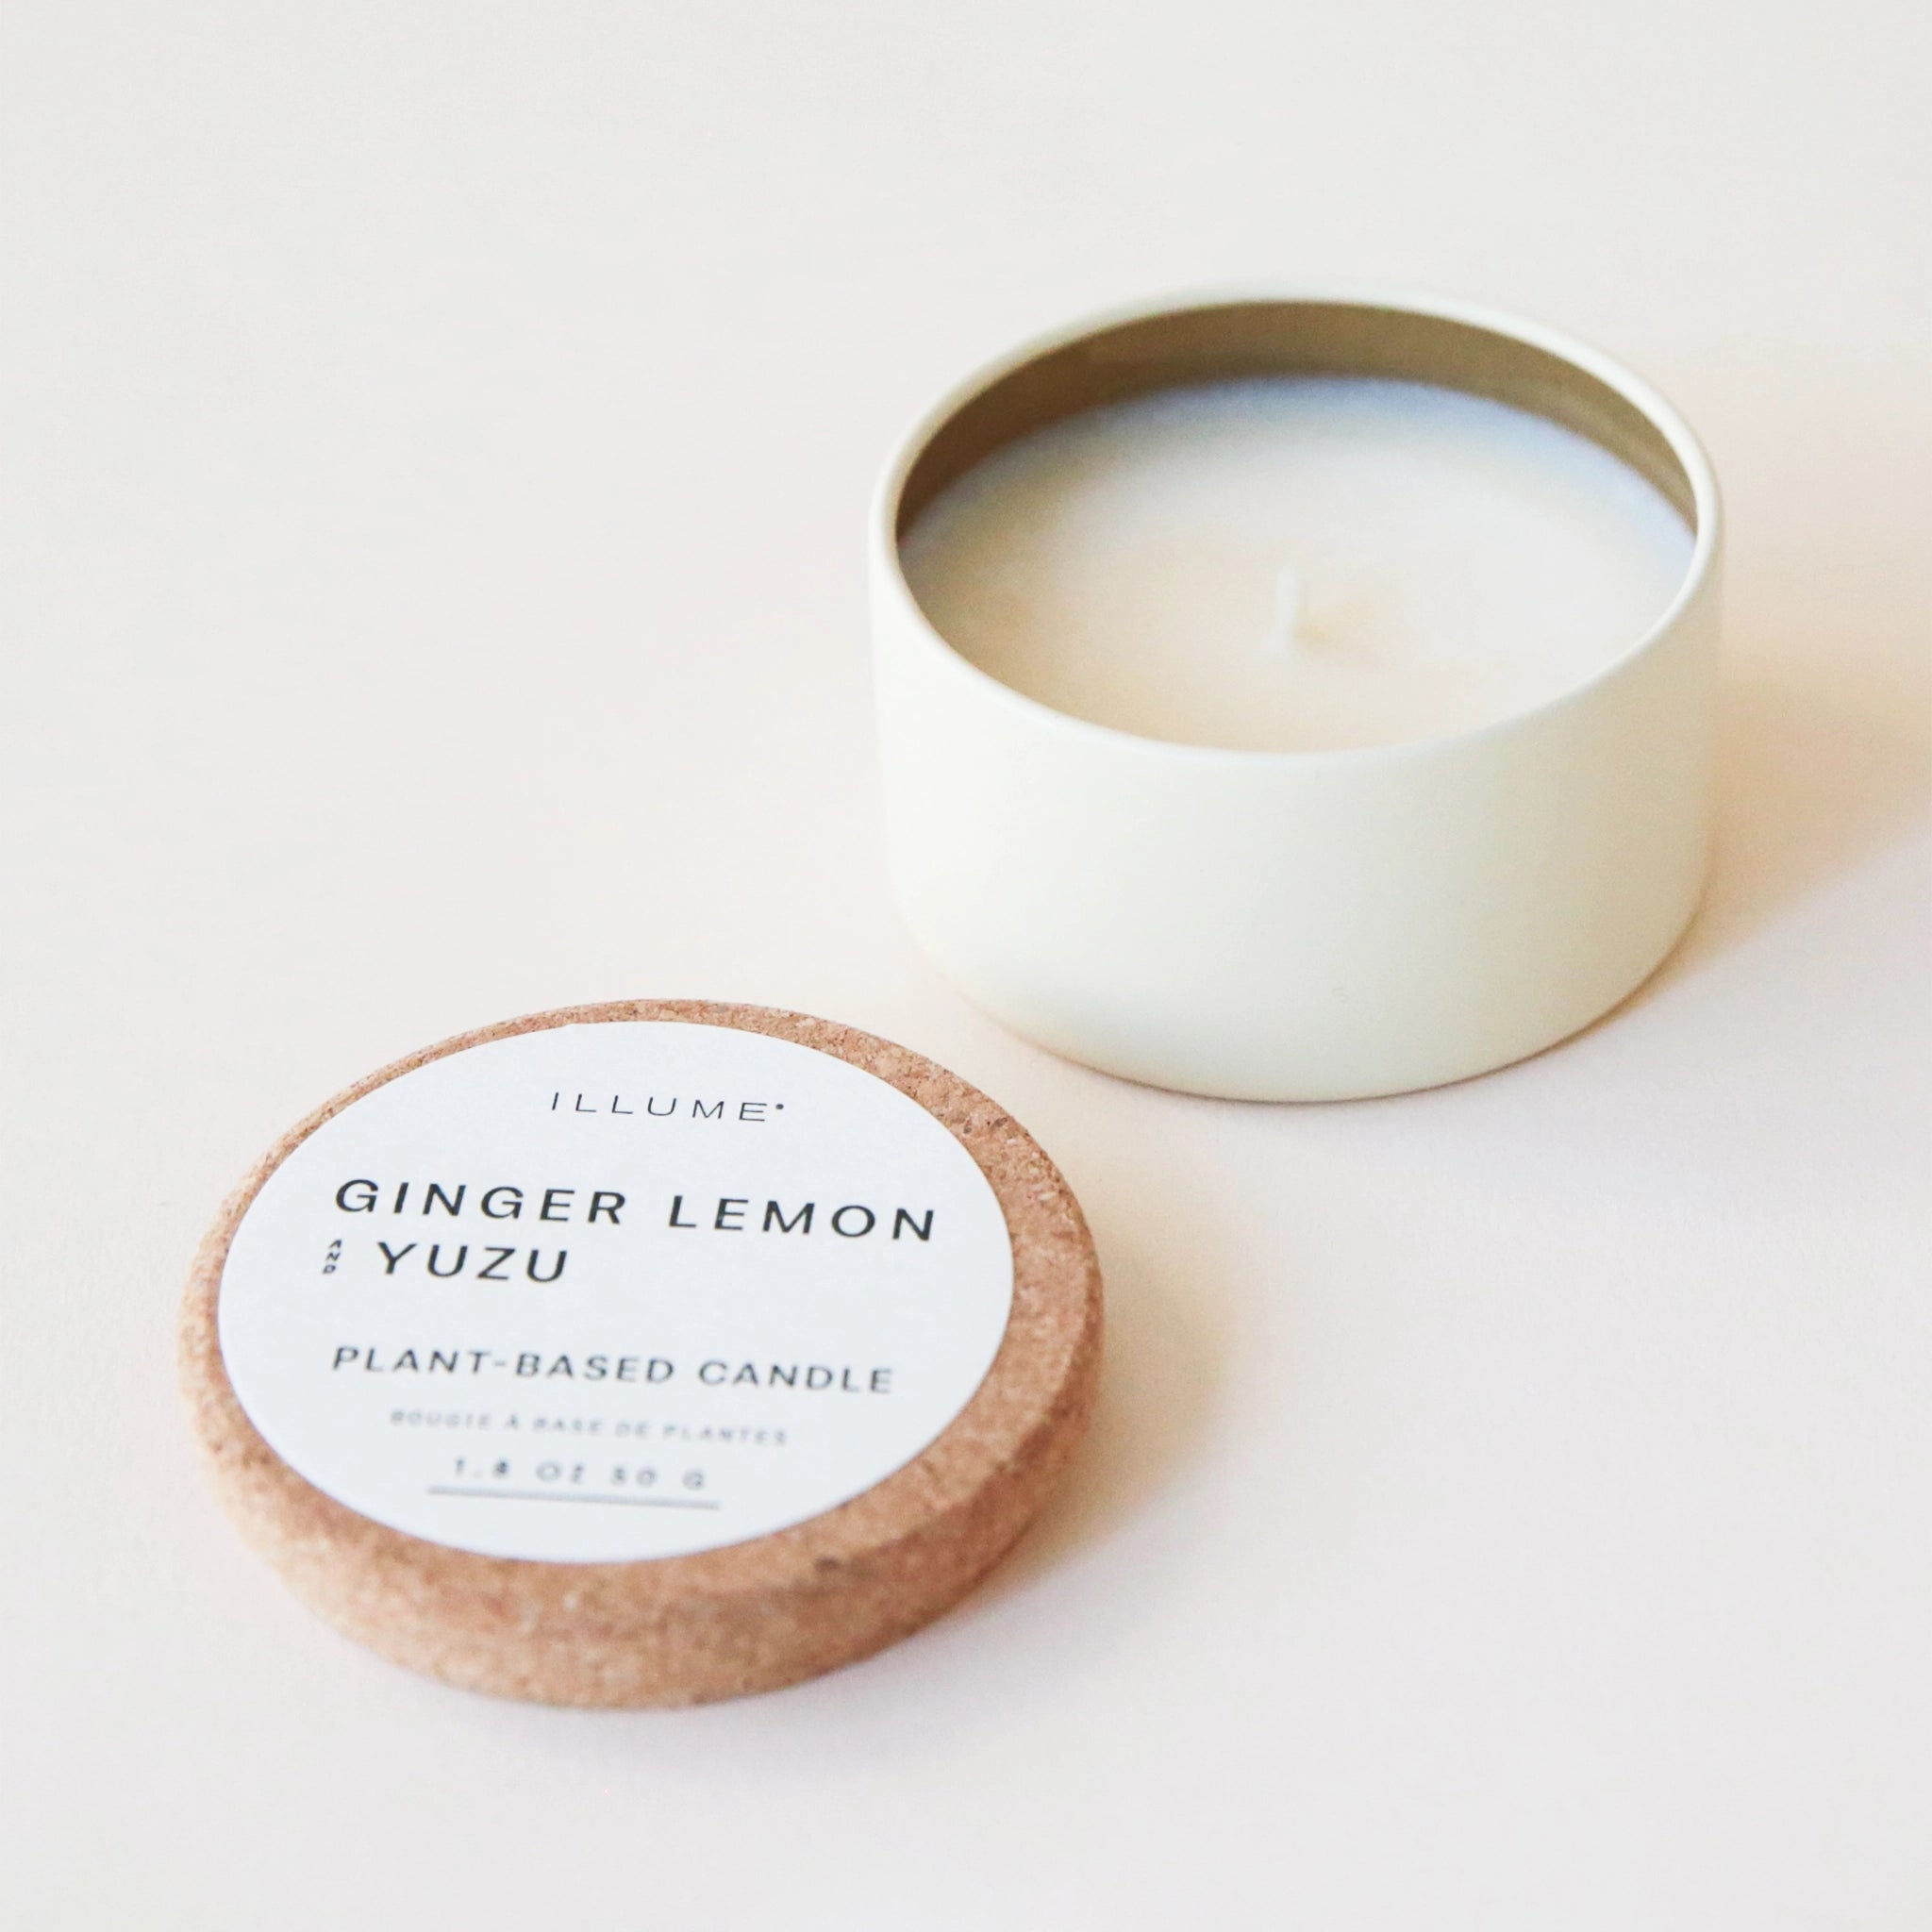 A cream tin candle with white wax and a cork lid that reads, "Ginger Lemon & Yuzu Plant Based Candle" in black letters.